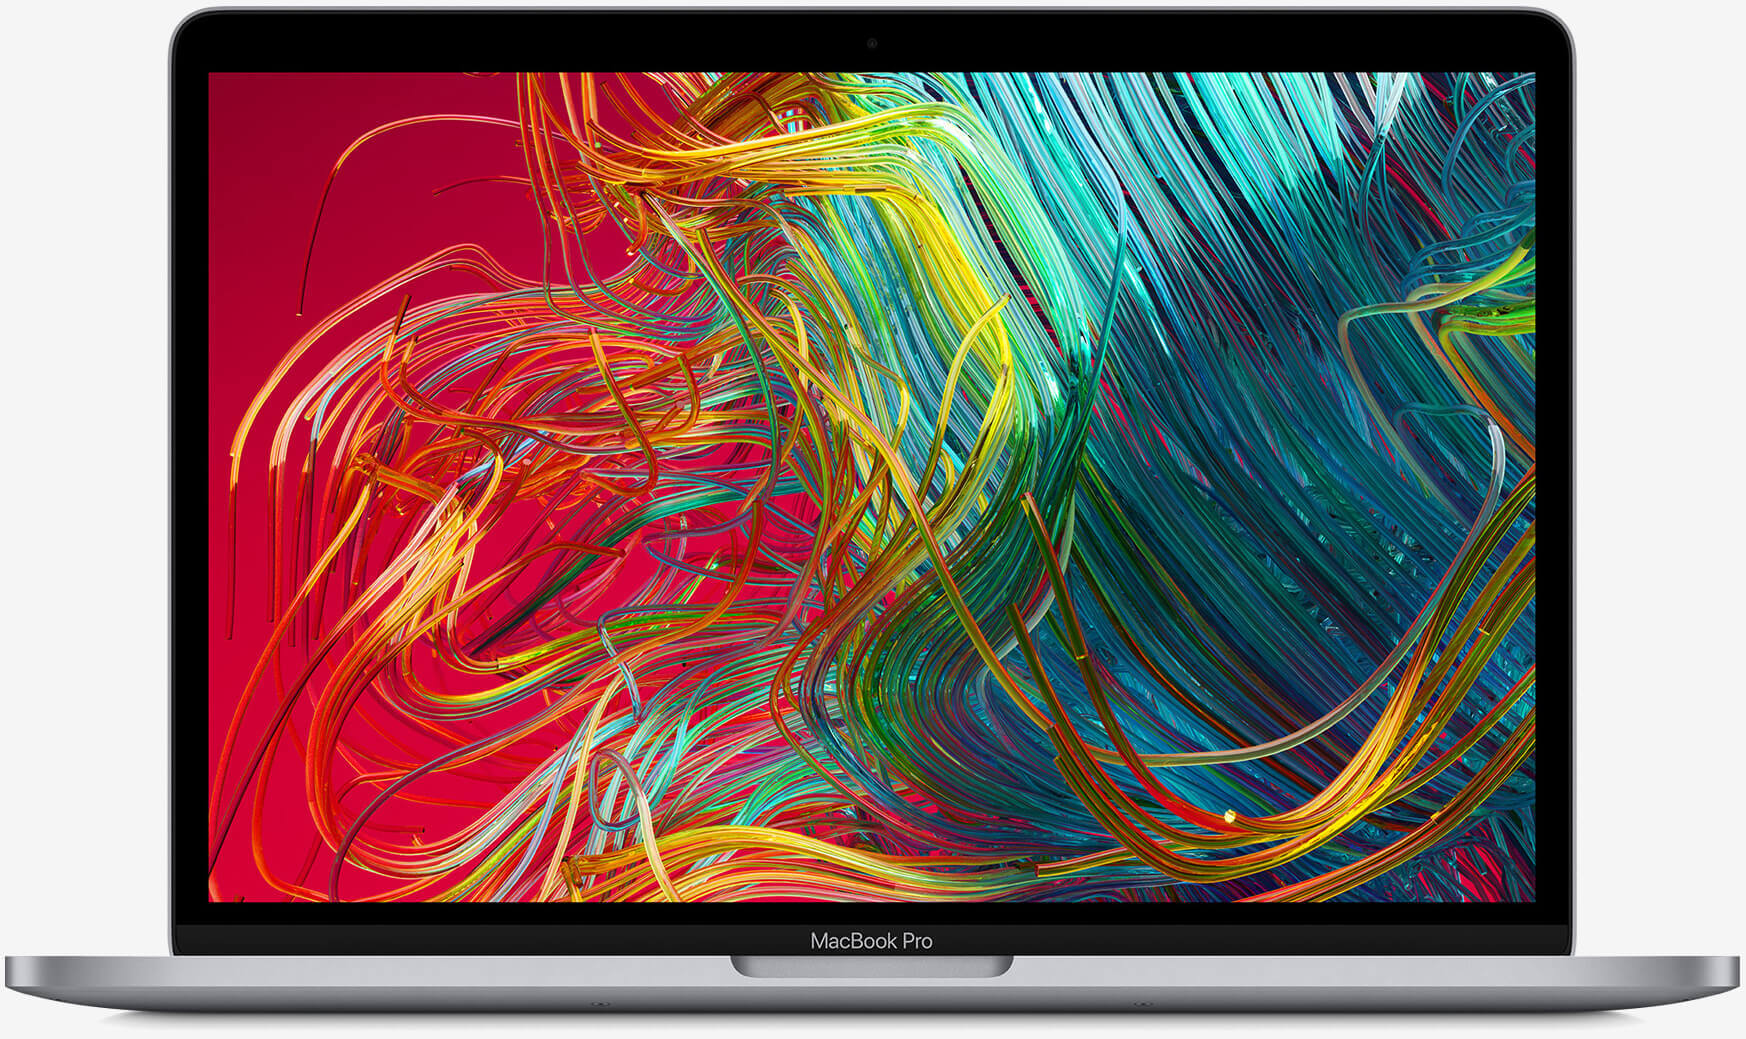 Apple announces refreshed 13-inch MacBook Pro with Magic Keyboard